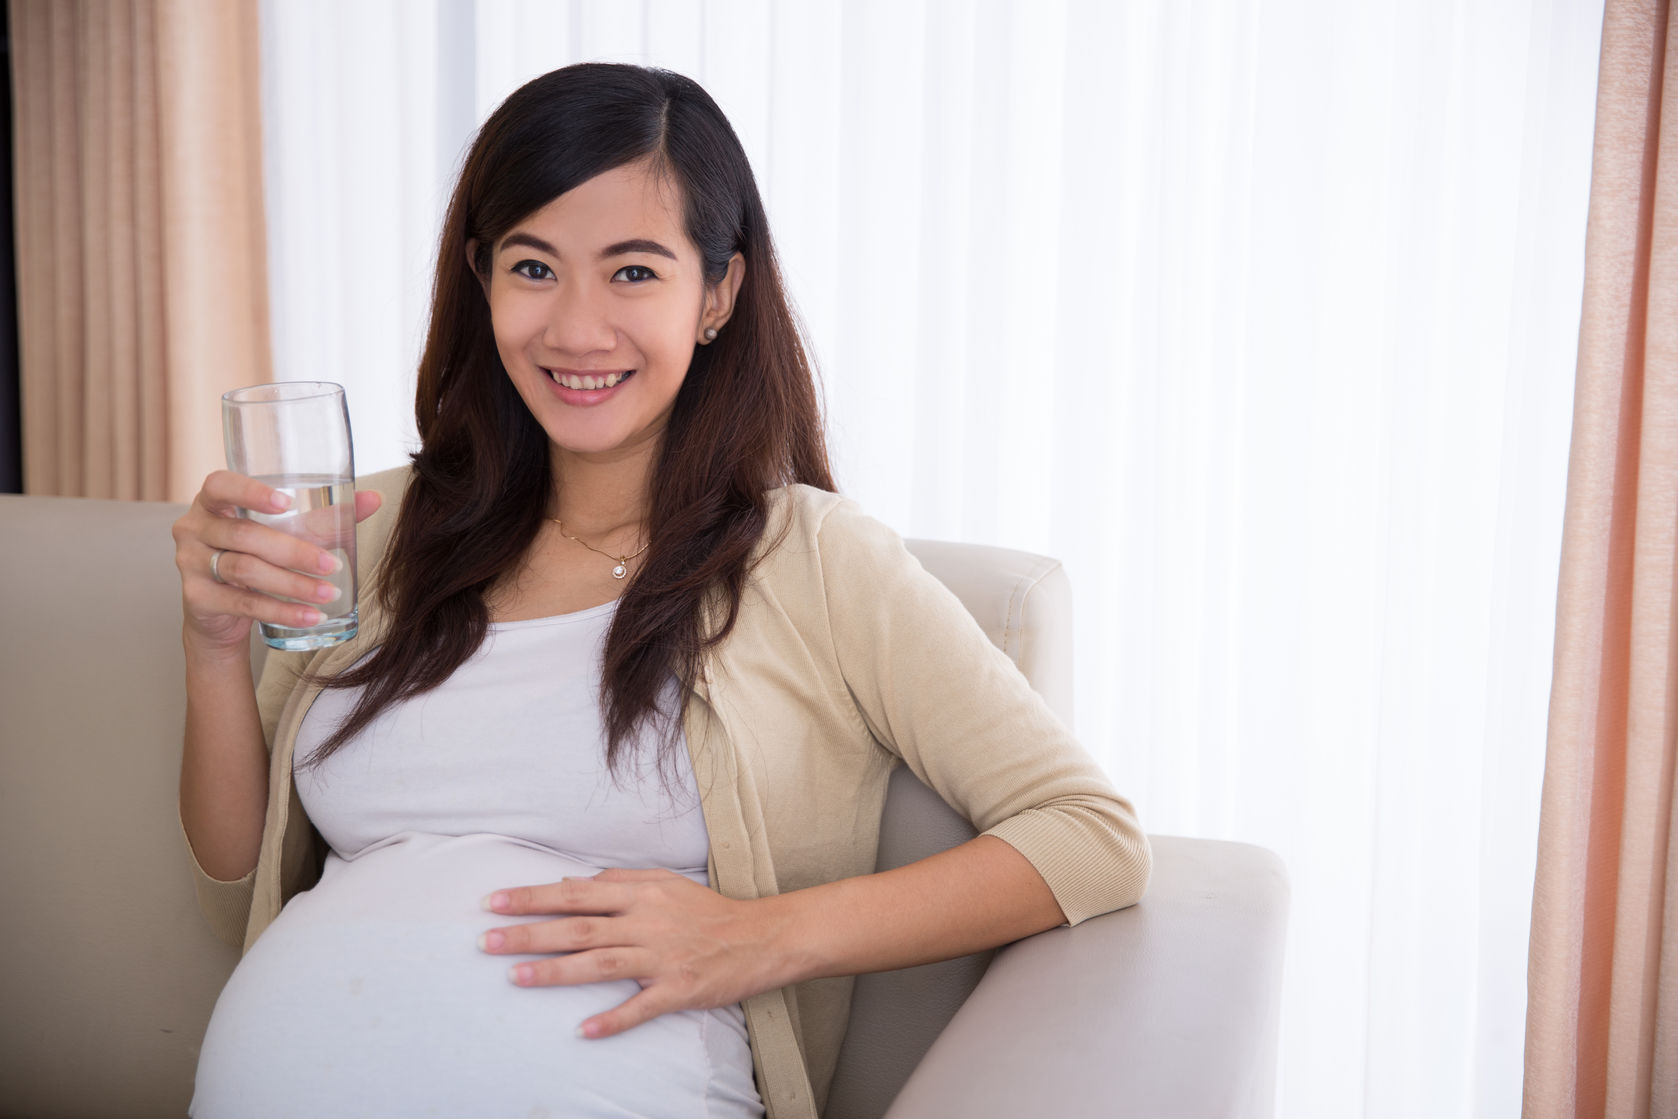 Challenges at the Third Trimester of Pregnancy and How to Overcome Them